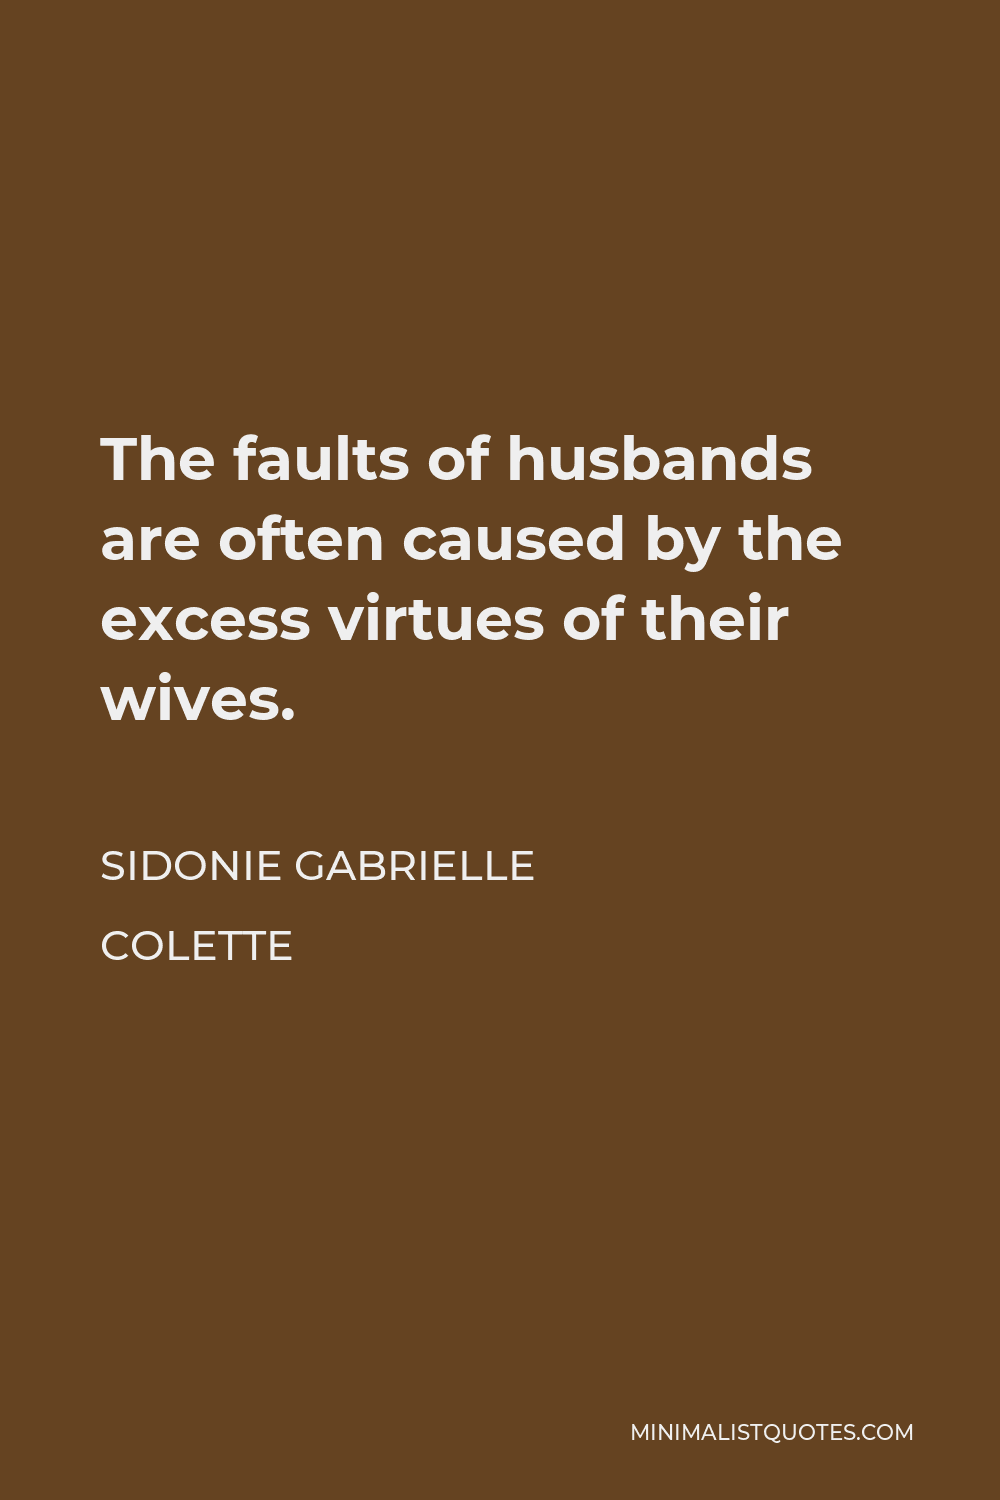 Sidonie Gabrielle Colette Quote - The faults of husbands are often caused by the excess virtues of their wives.